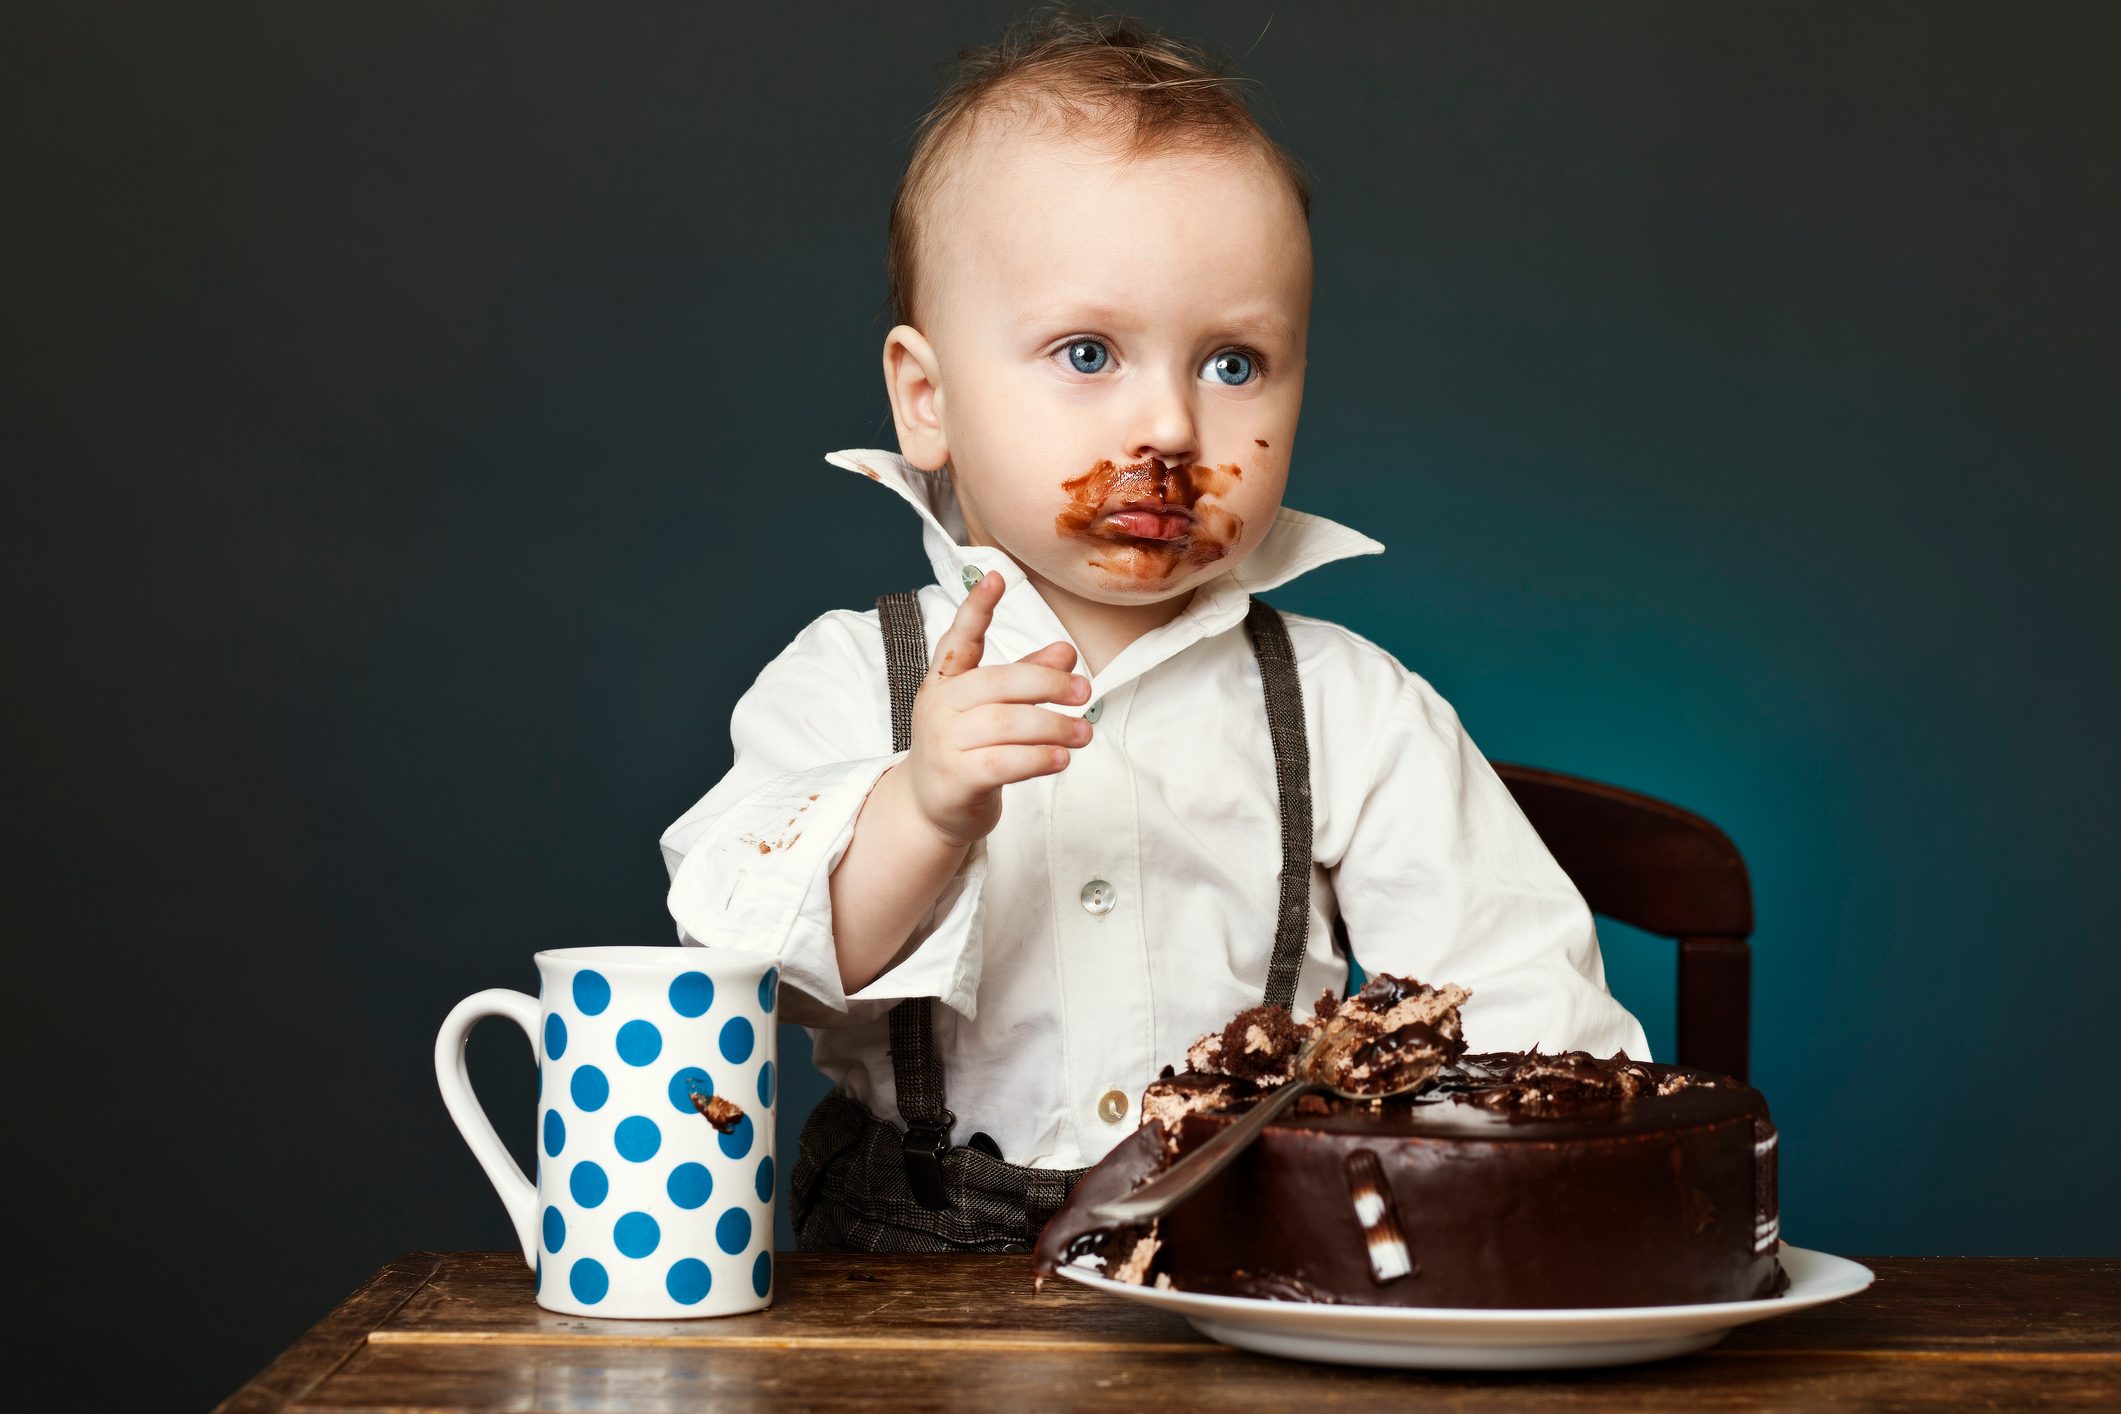 A child covered in chocolate cake on his face